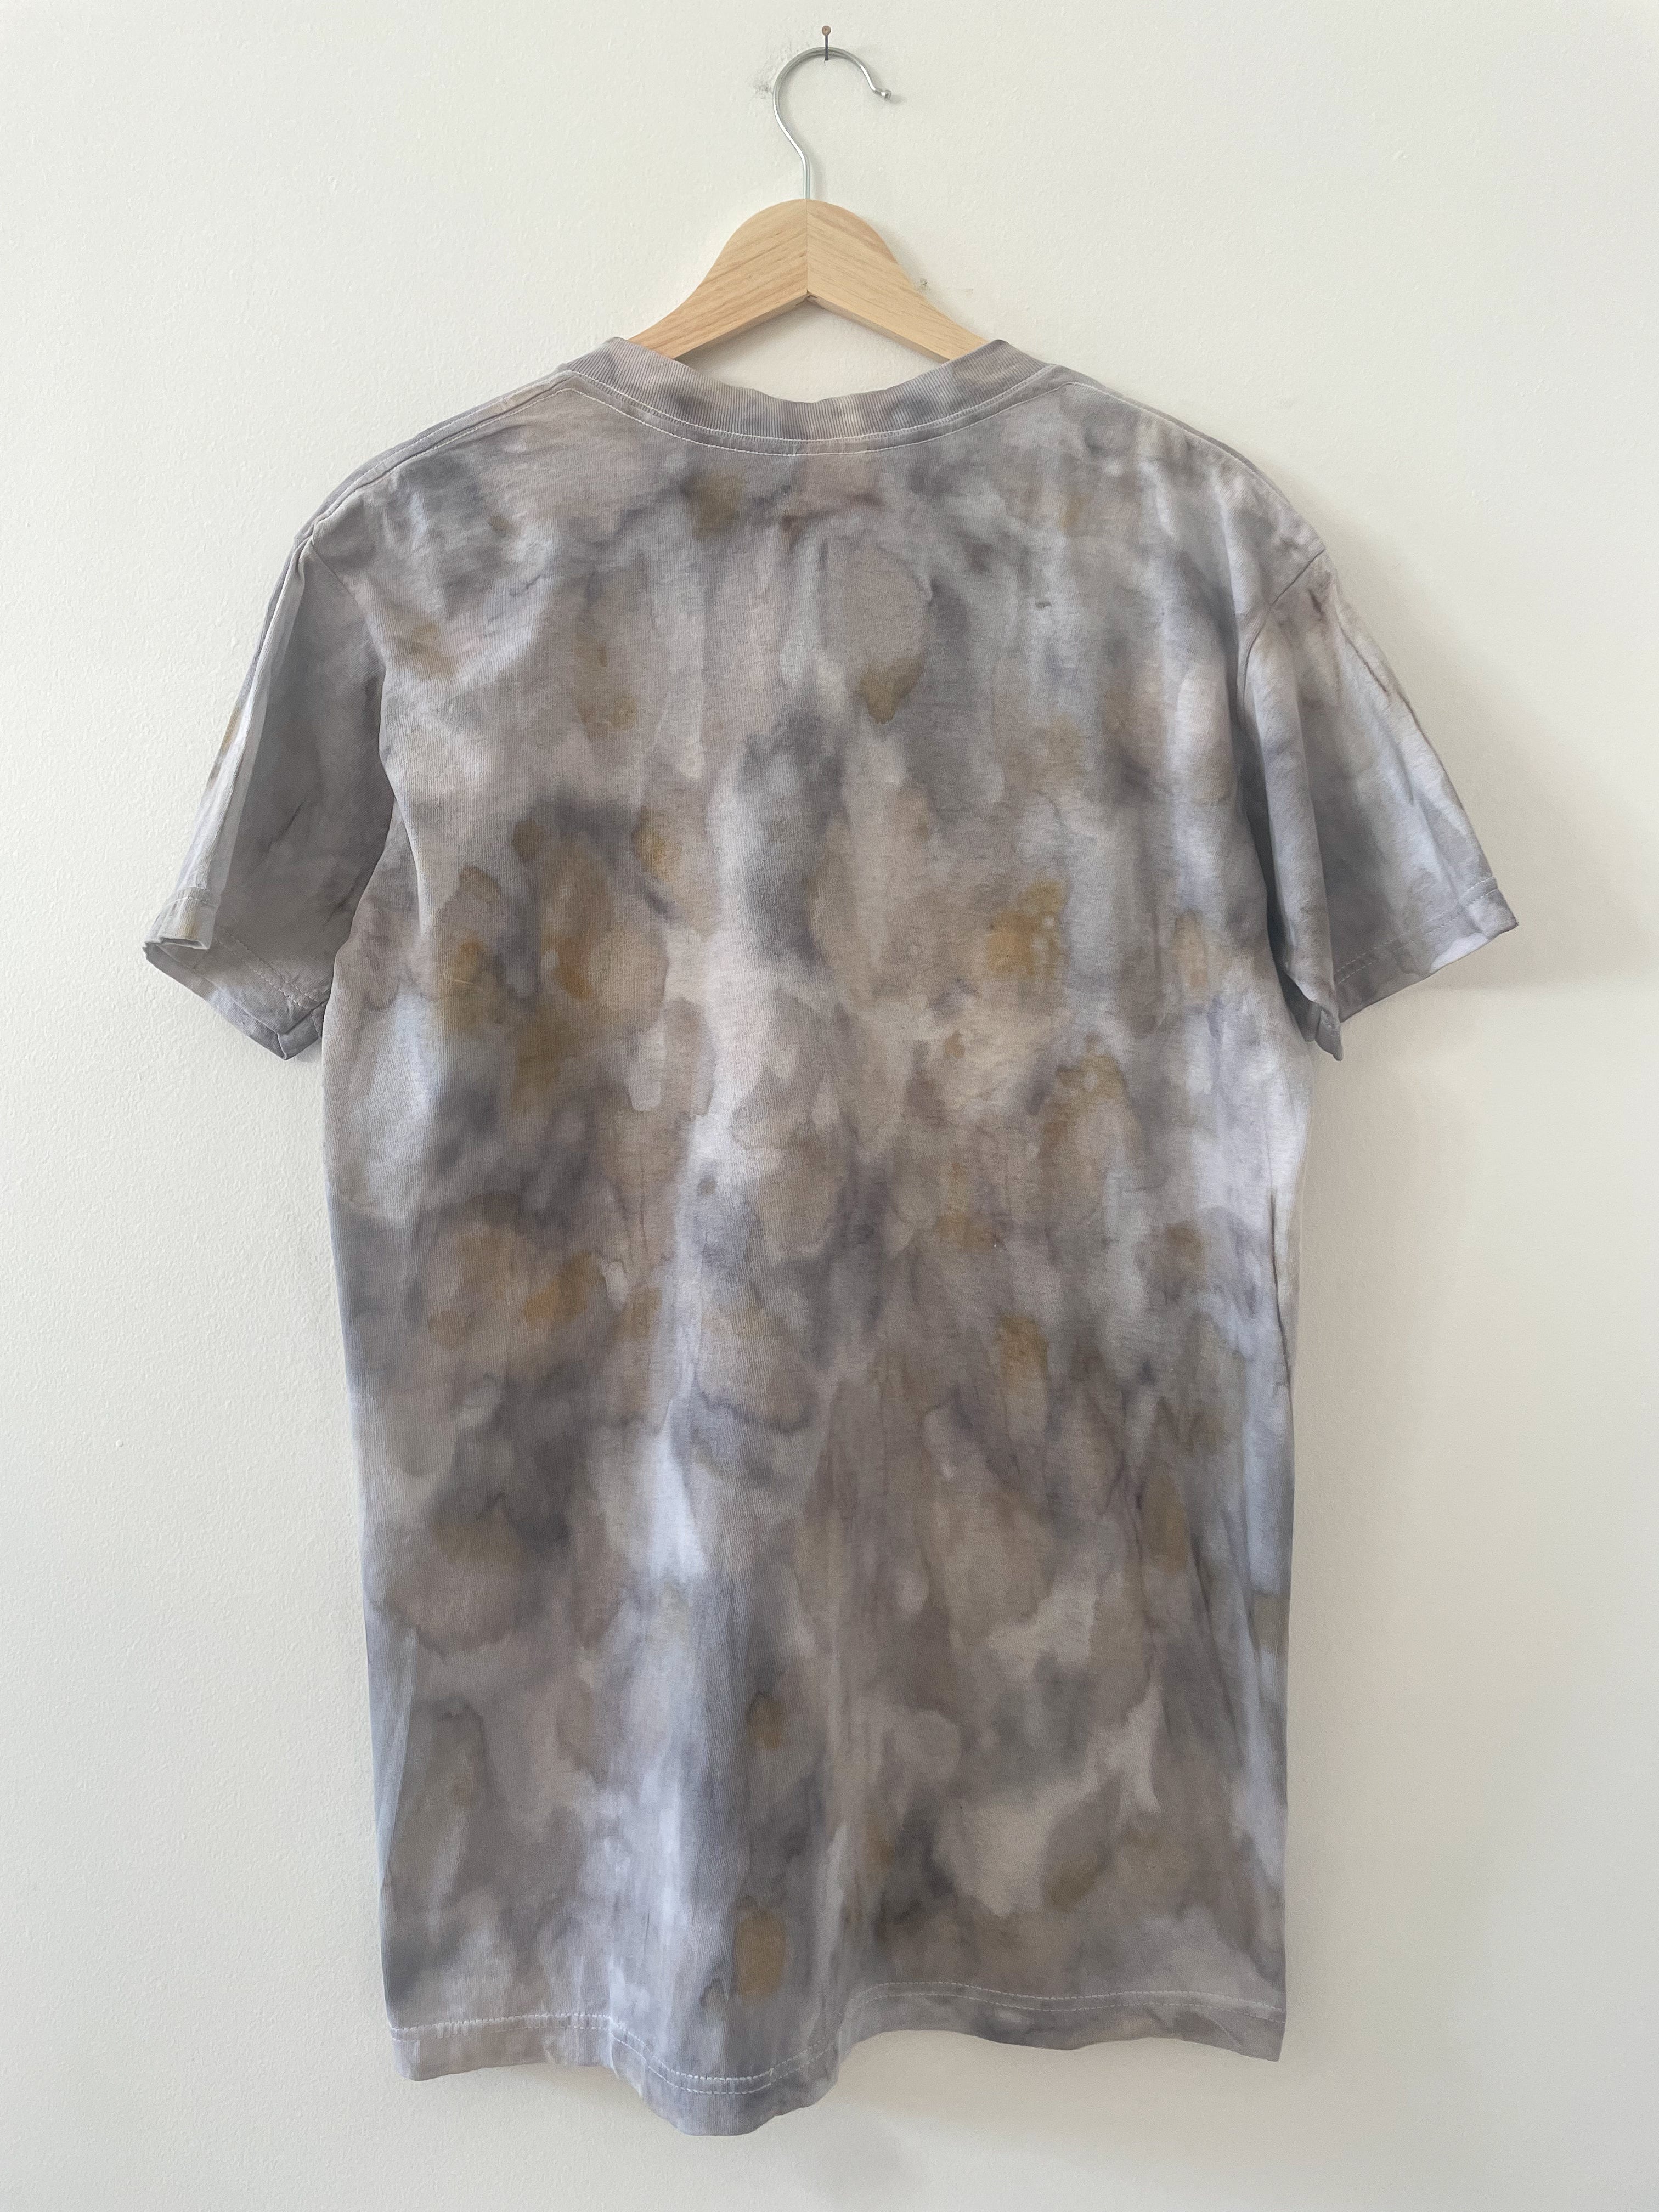 Hand-Dyed & Painted Cotton T-shirt - Sumac